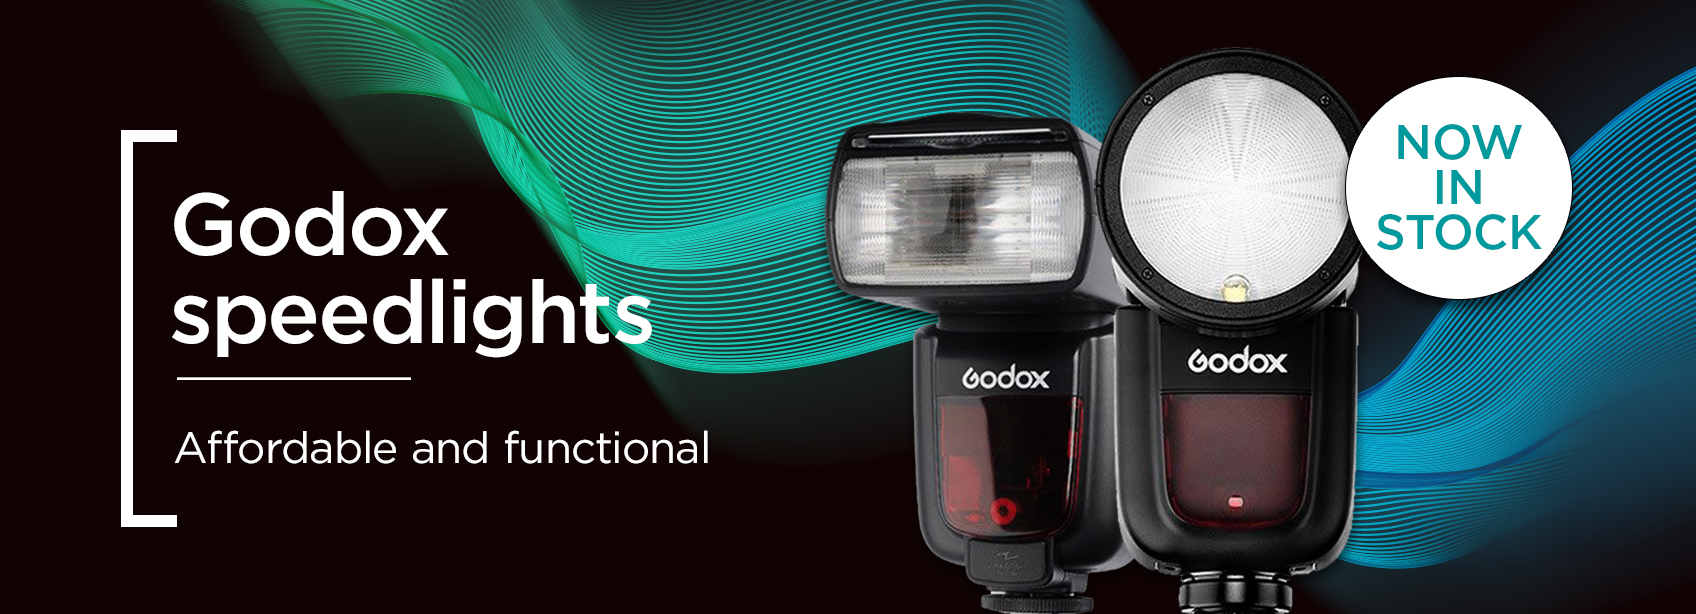 Godox Speedlights | Affordable and Functional